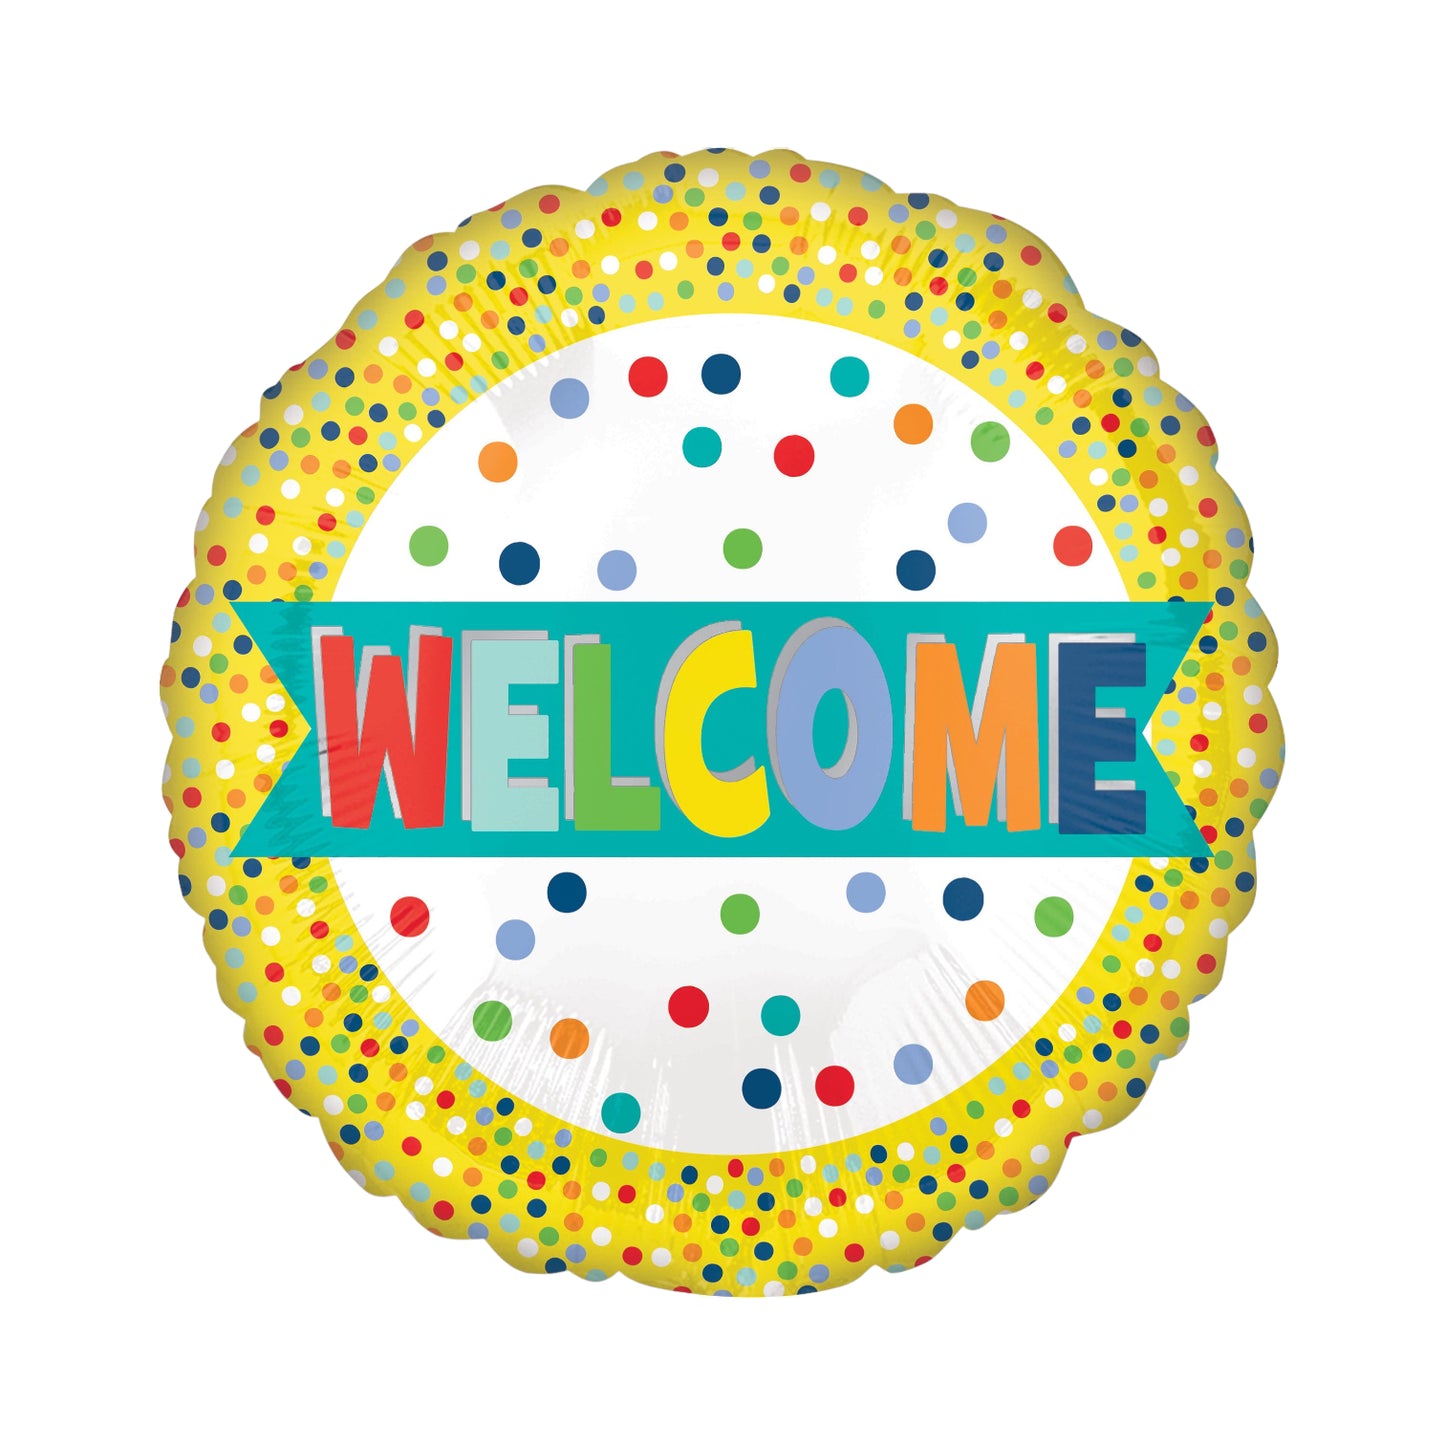 Welcome Balloon - Yellow Border, Colour letters and Dots.